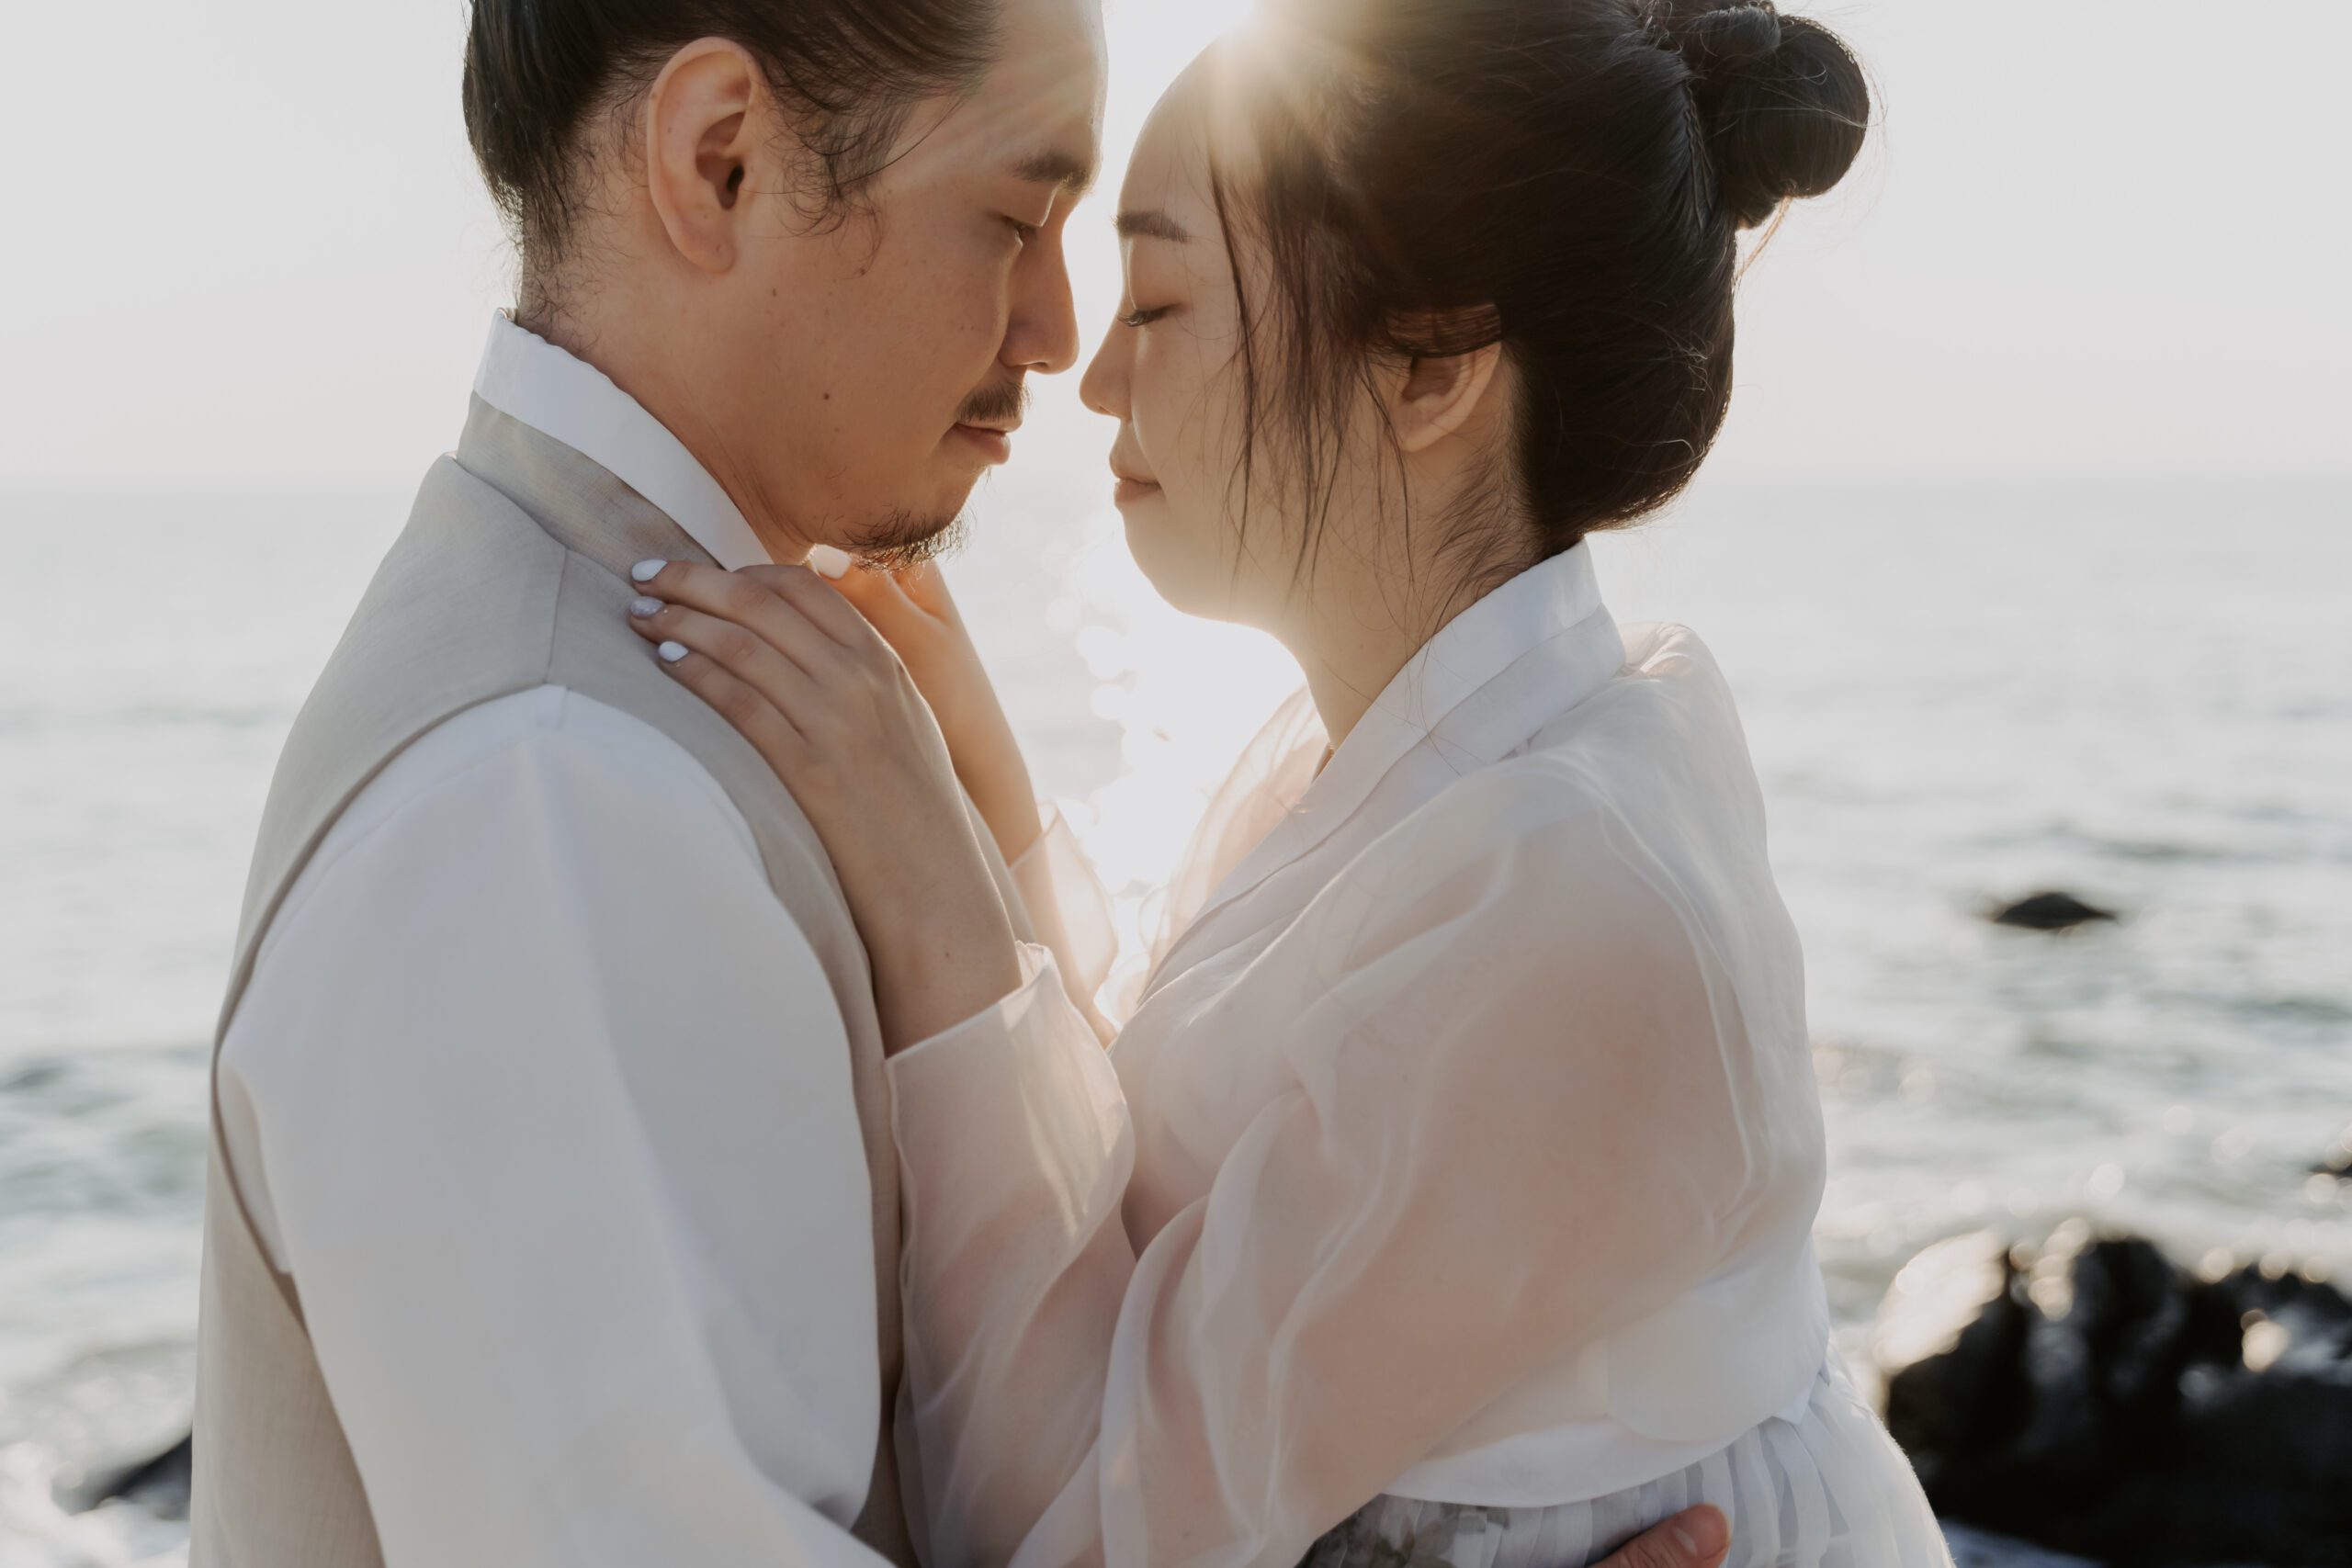 A pre-wedding couple embracing in front of the ocean in Jeju.